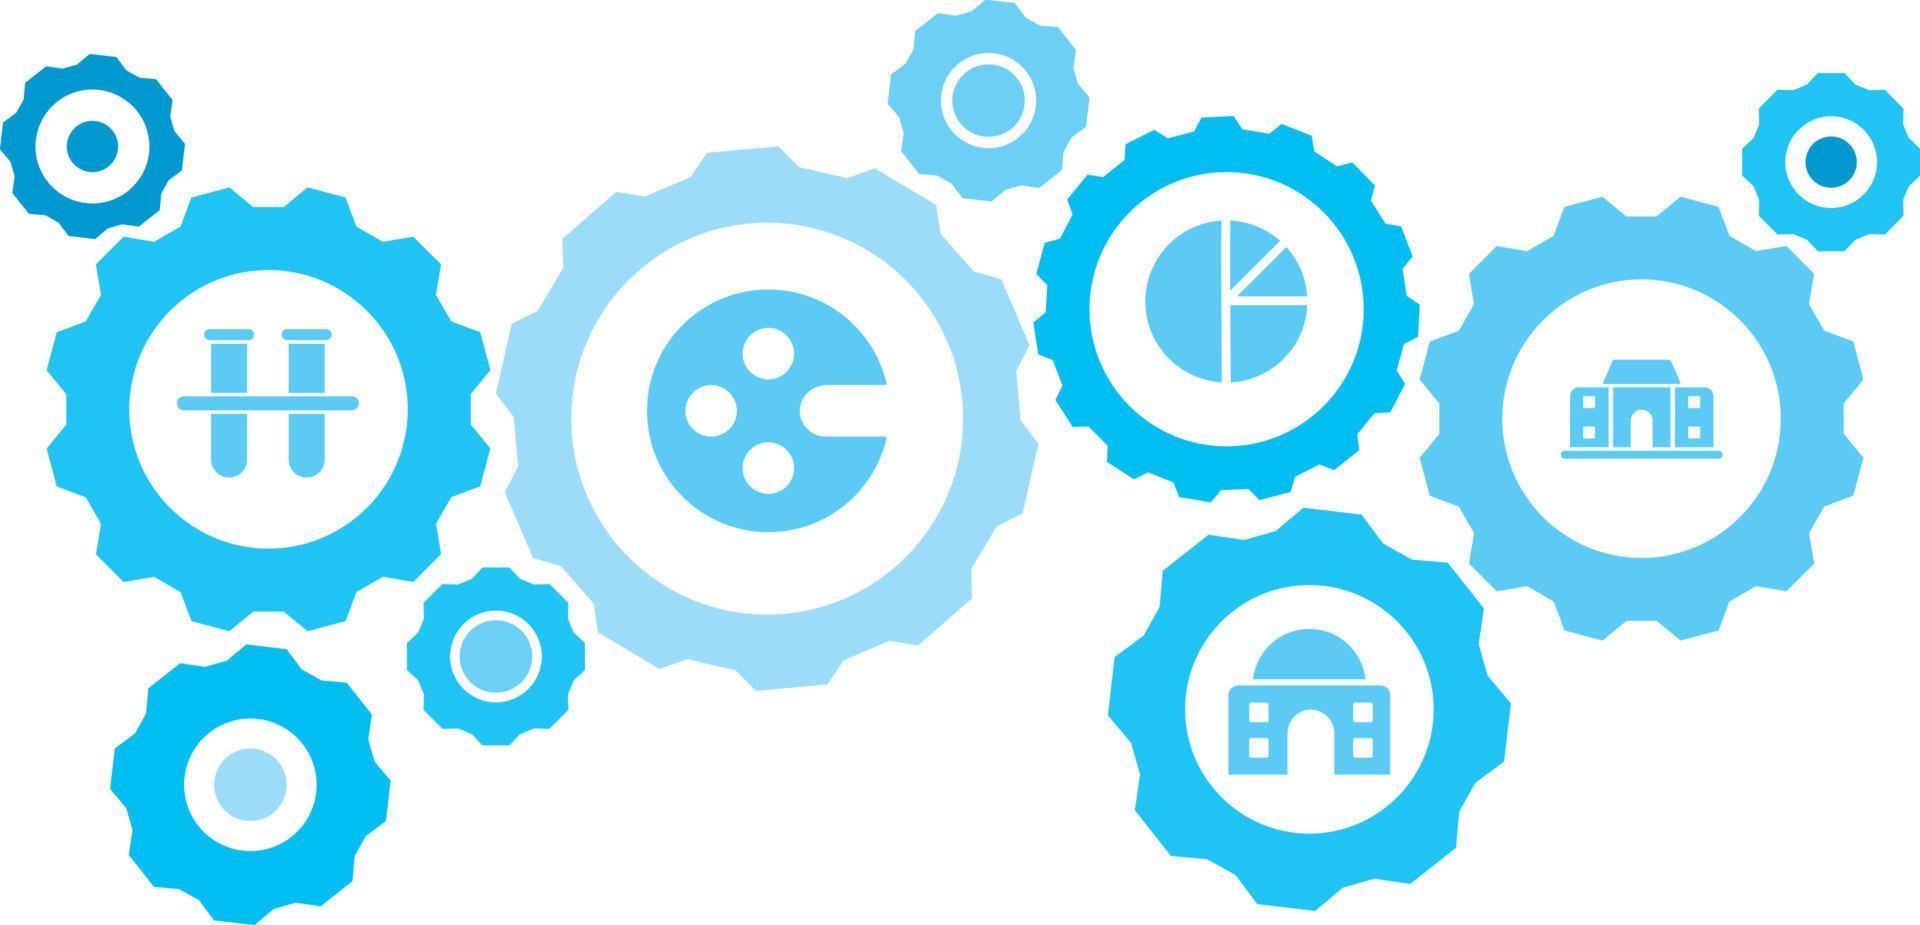 Connected gears and icons for logistic, service, shipping, distribution, transport, market, communicate concepts,building, college gear blue icon set. Delivery mechanism concept. on white background vector